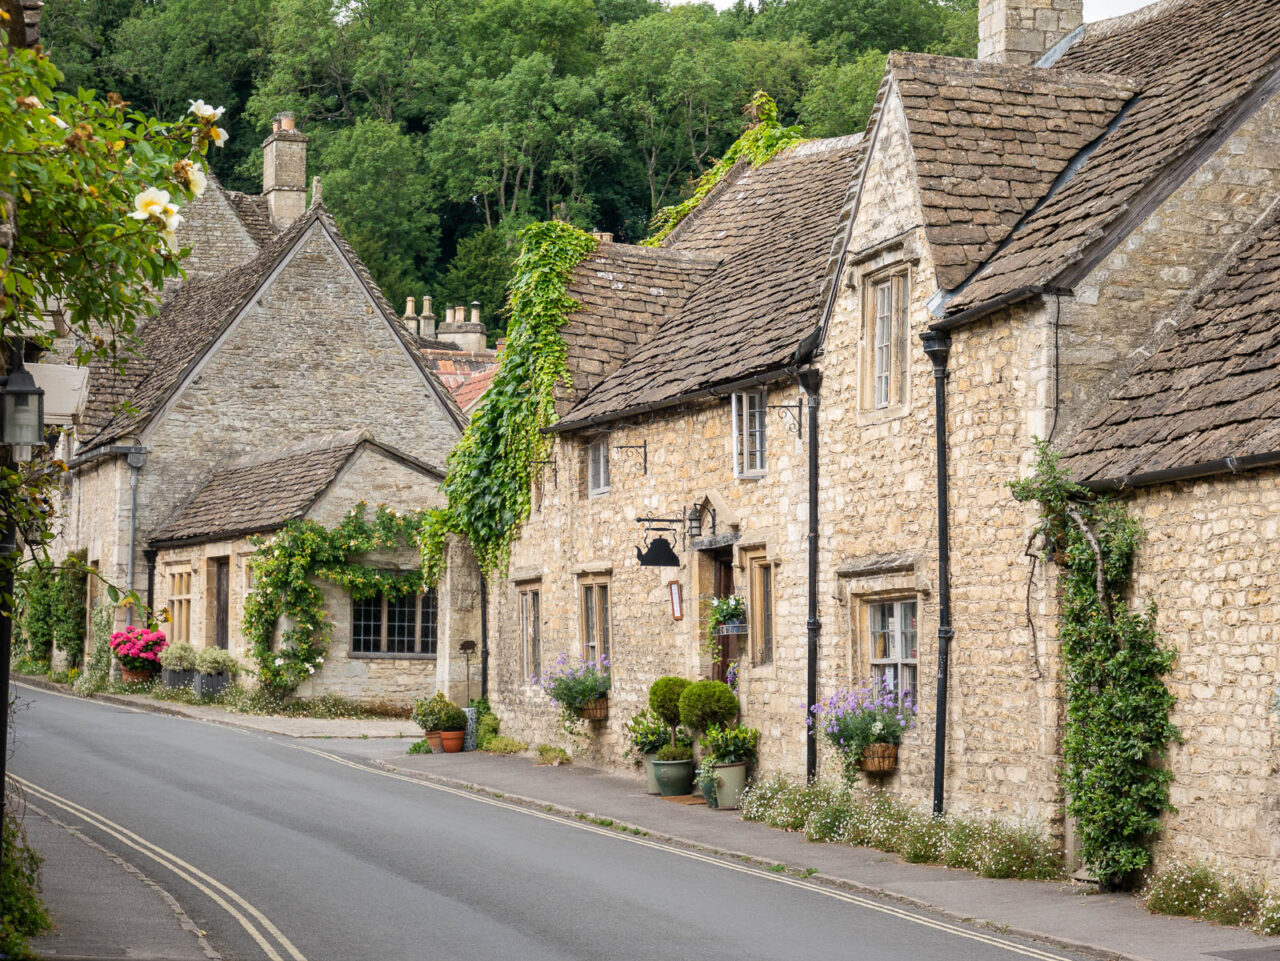 Cottages in Castle Combe in the Cotswolds